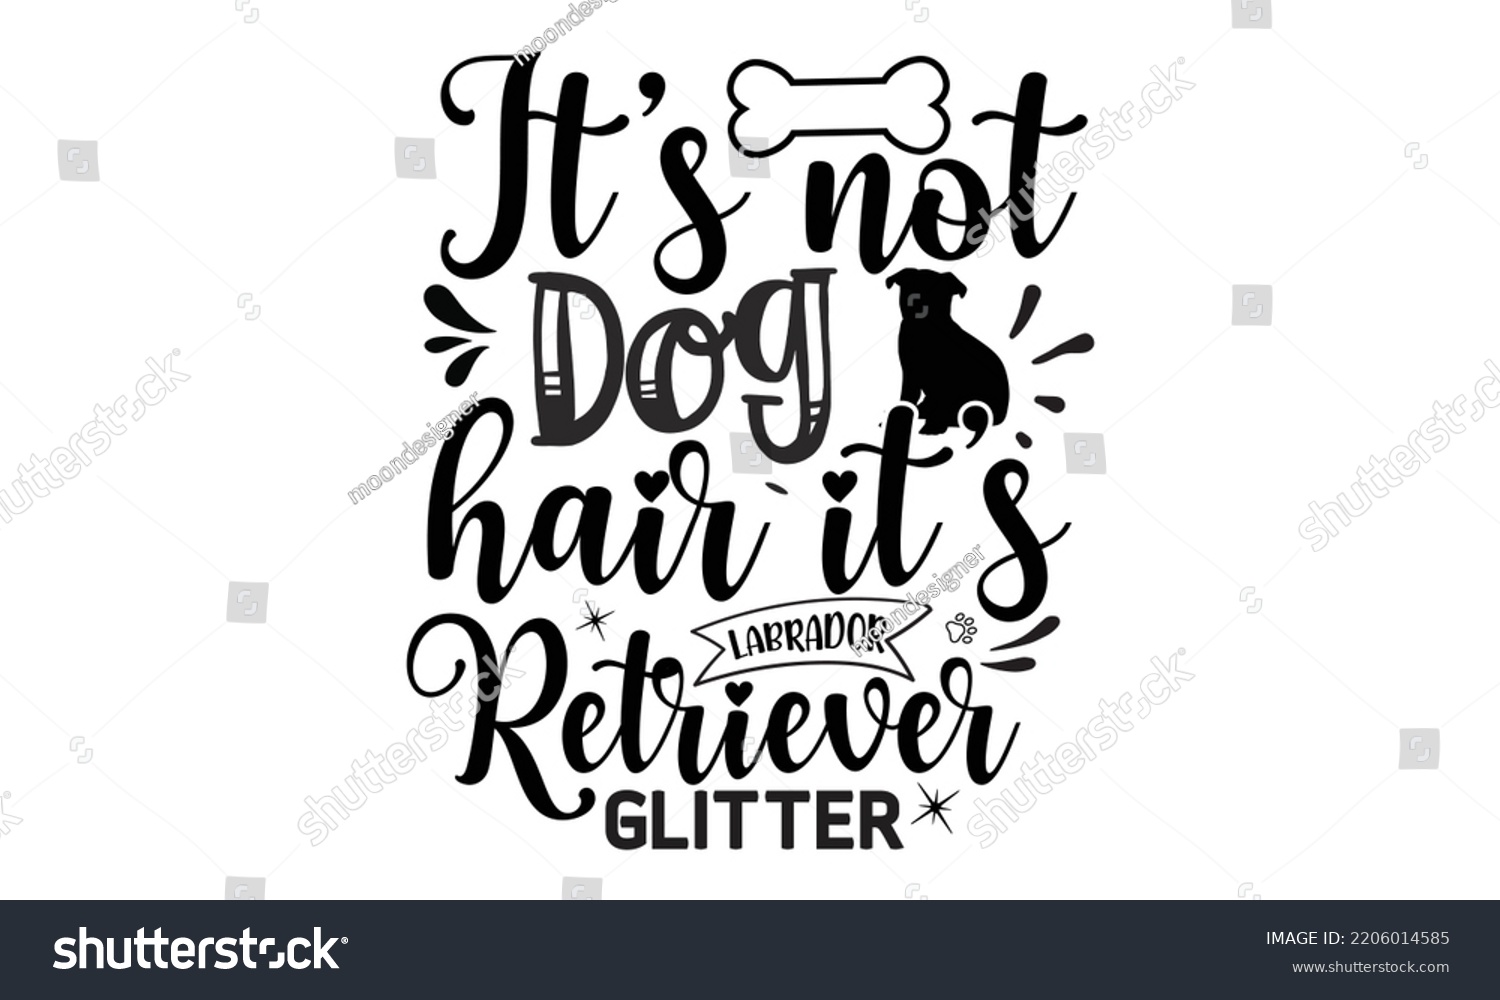 SVG of It’s not dog hair it’s labrador retriever glitter - Labrador retriever t shirts design, Calligraphy design, Isolated on white background, SVG, EPS 10 svg